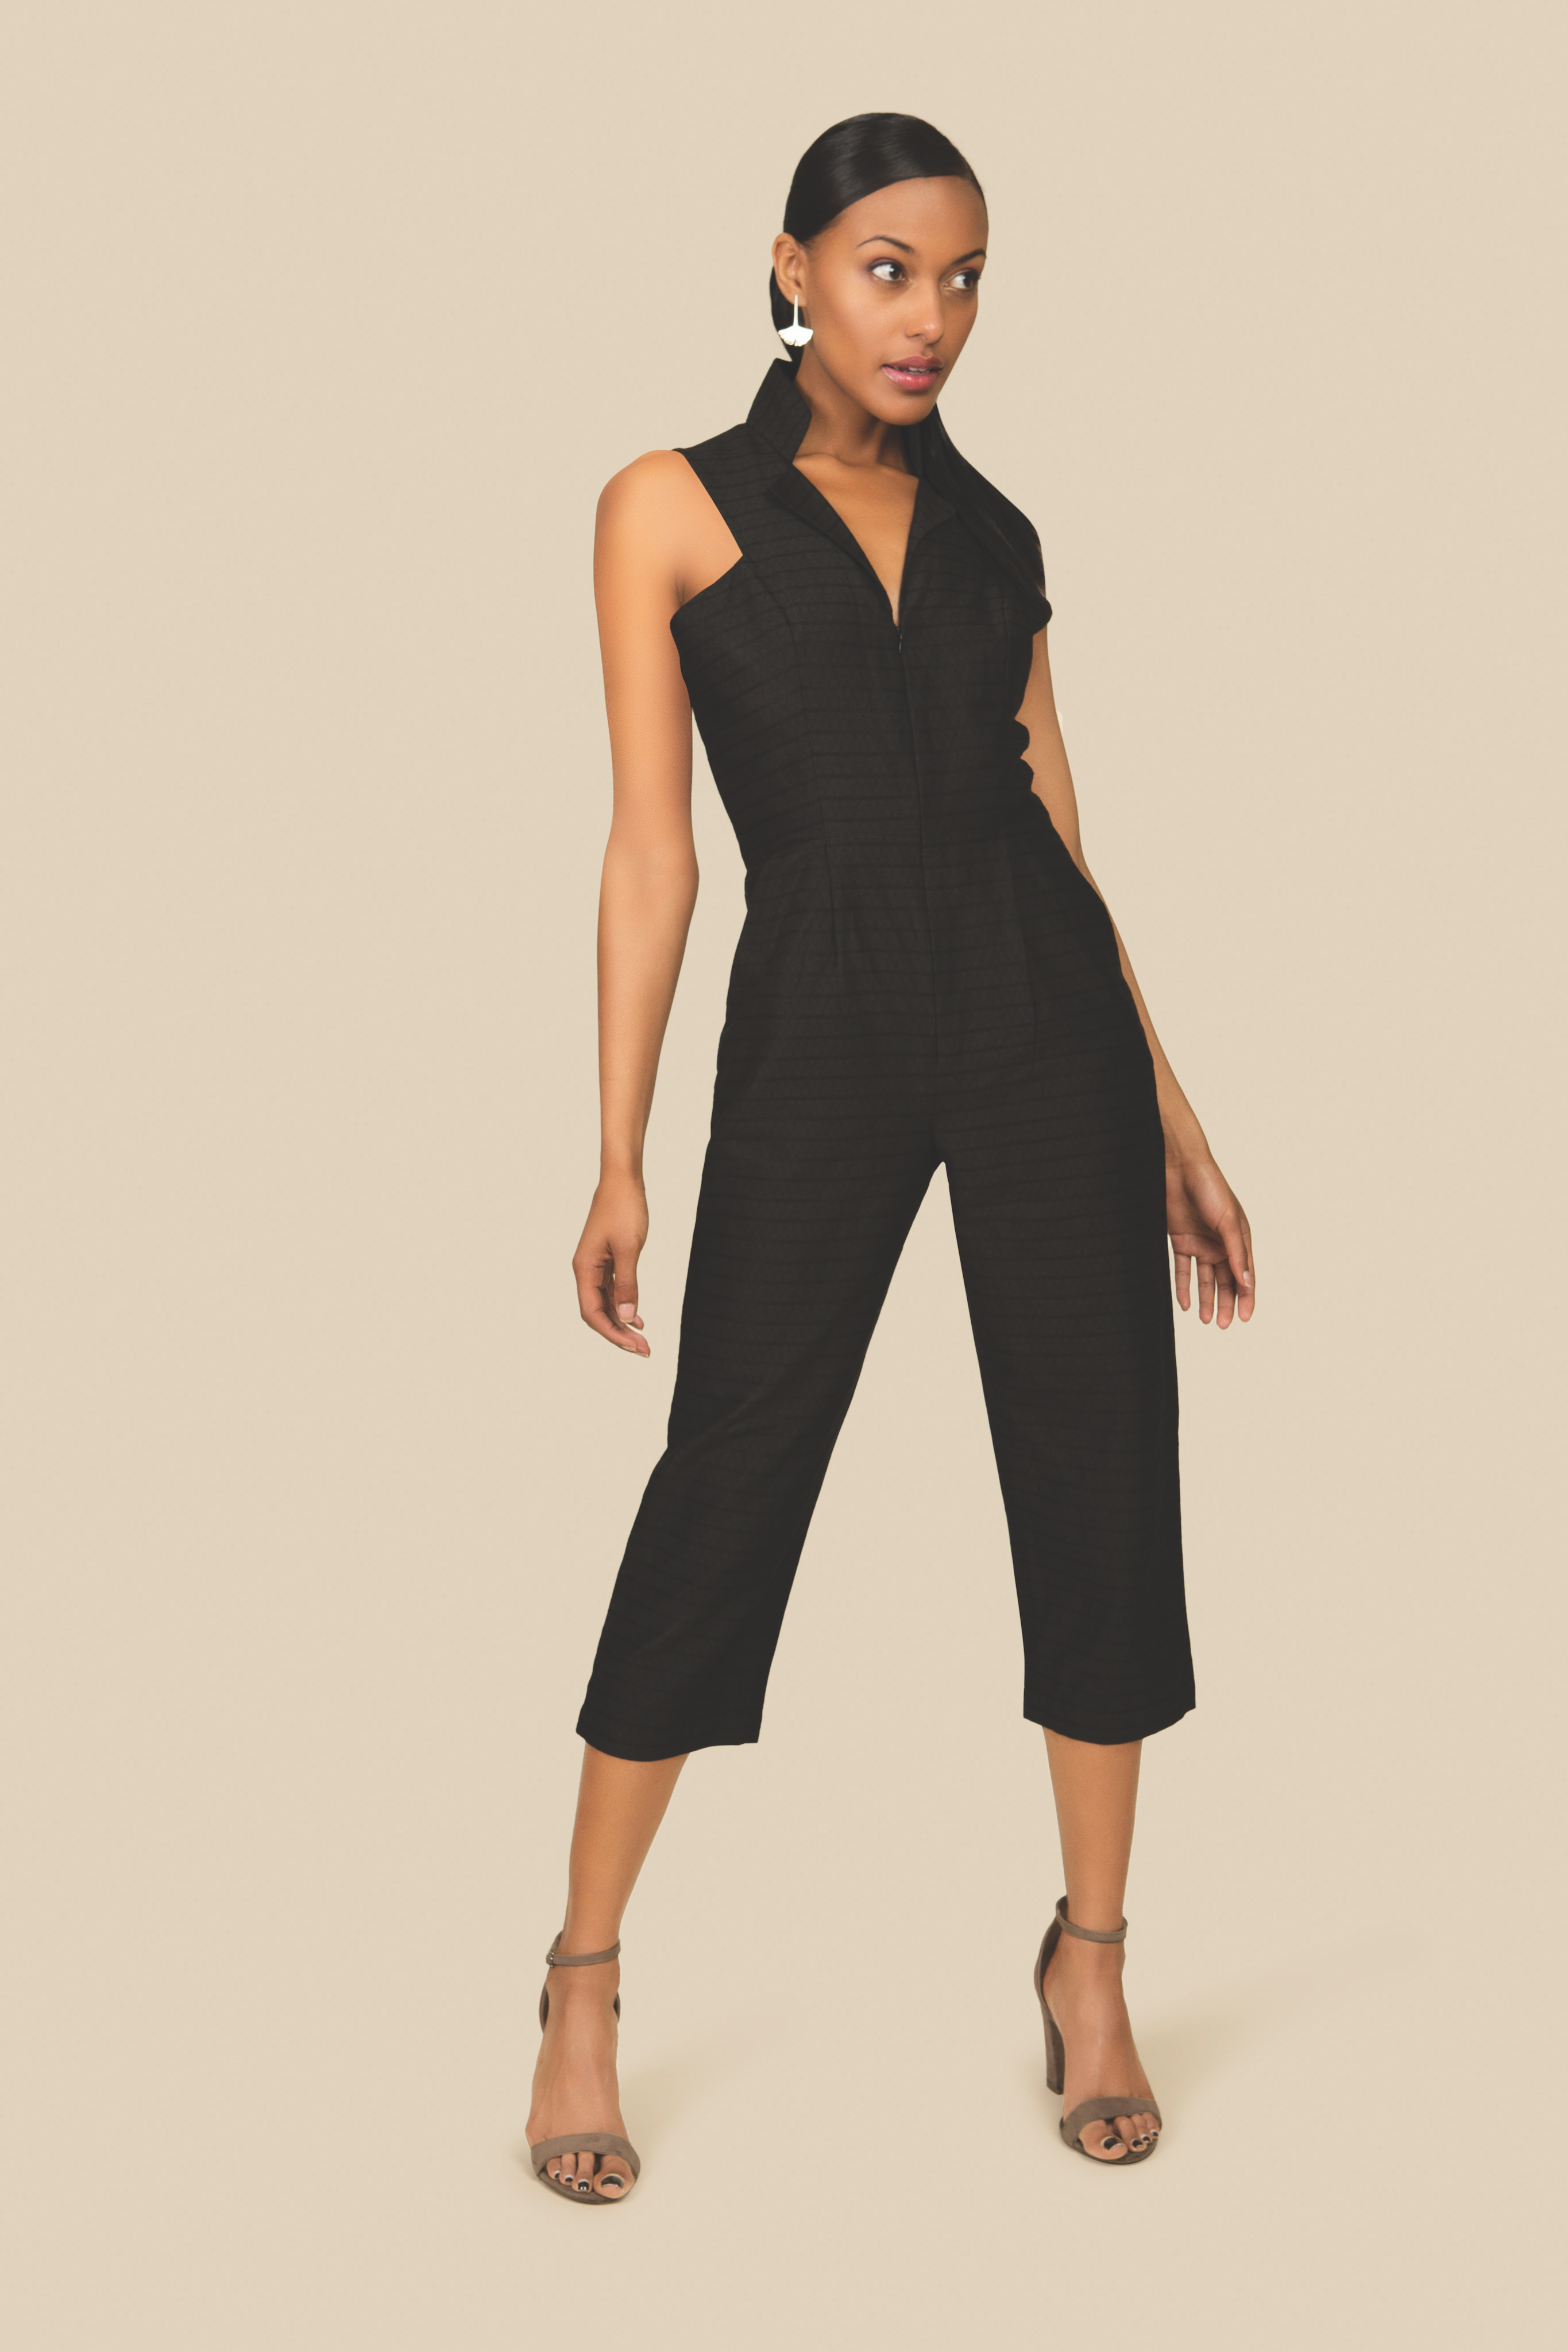 All Day Black Cotton Jumpsuit with Front Zipper – AGAATI